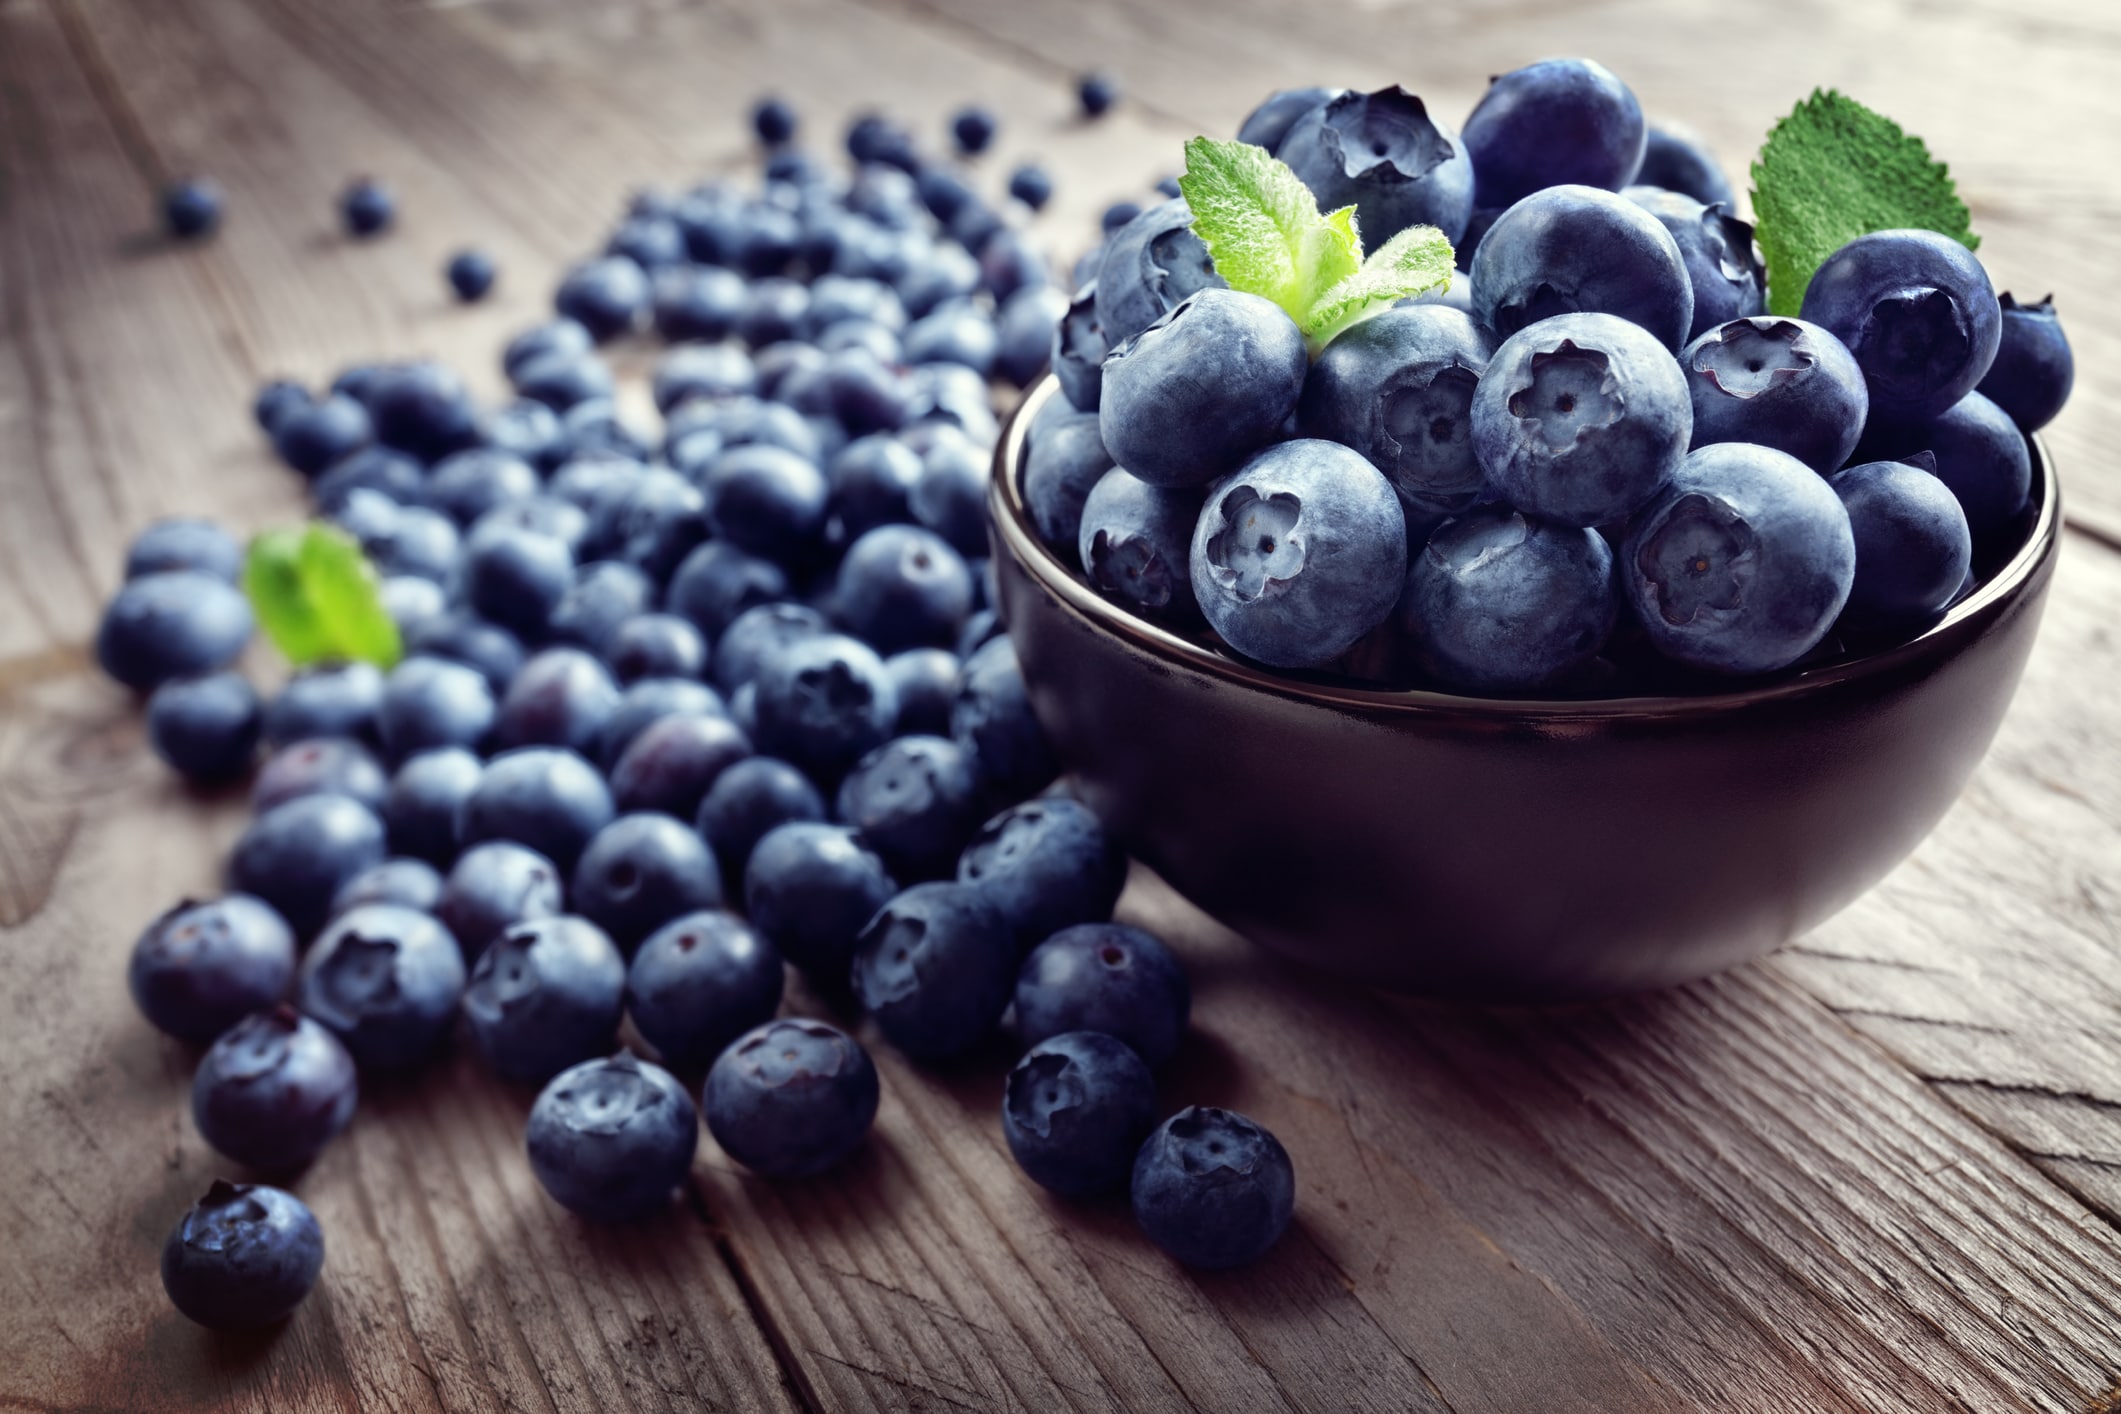 Eating Blueberries Daily Can Hel...